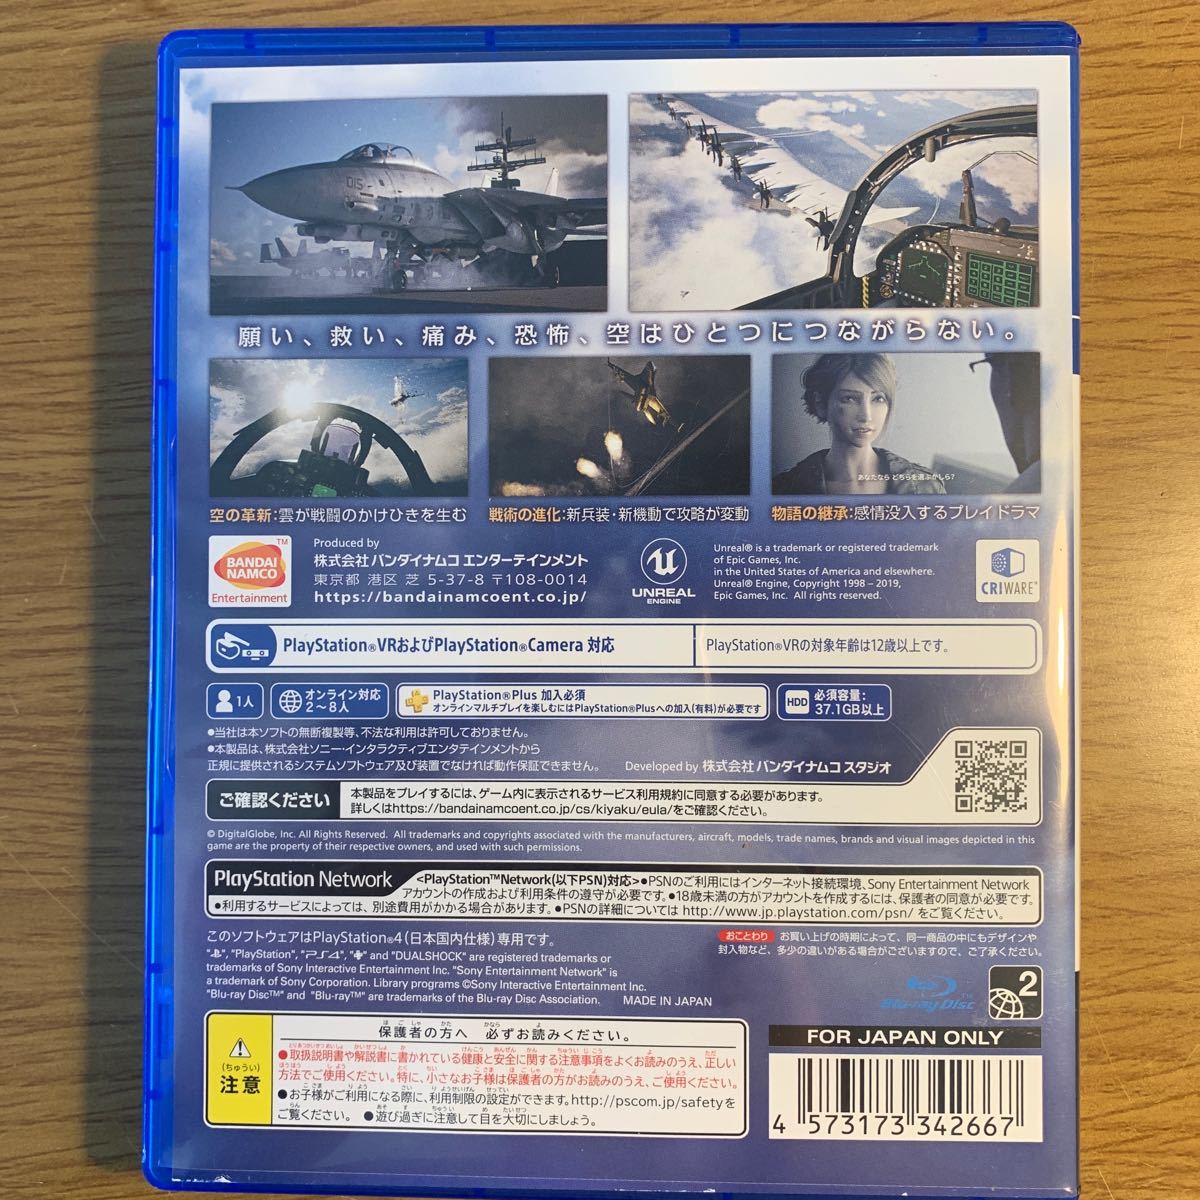 【PS4】 ACE COMBAT 7: SKIES UNKNOWN [通常版]プロダクトコード無し